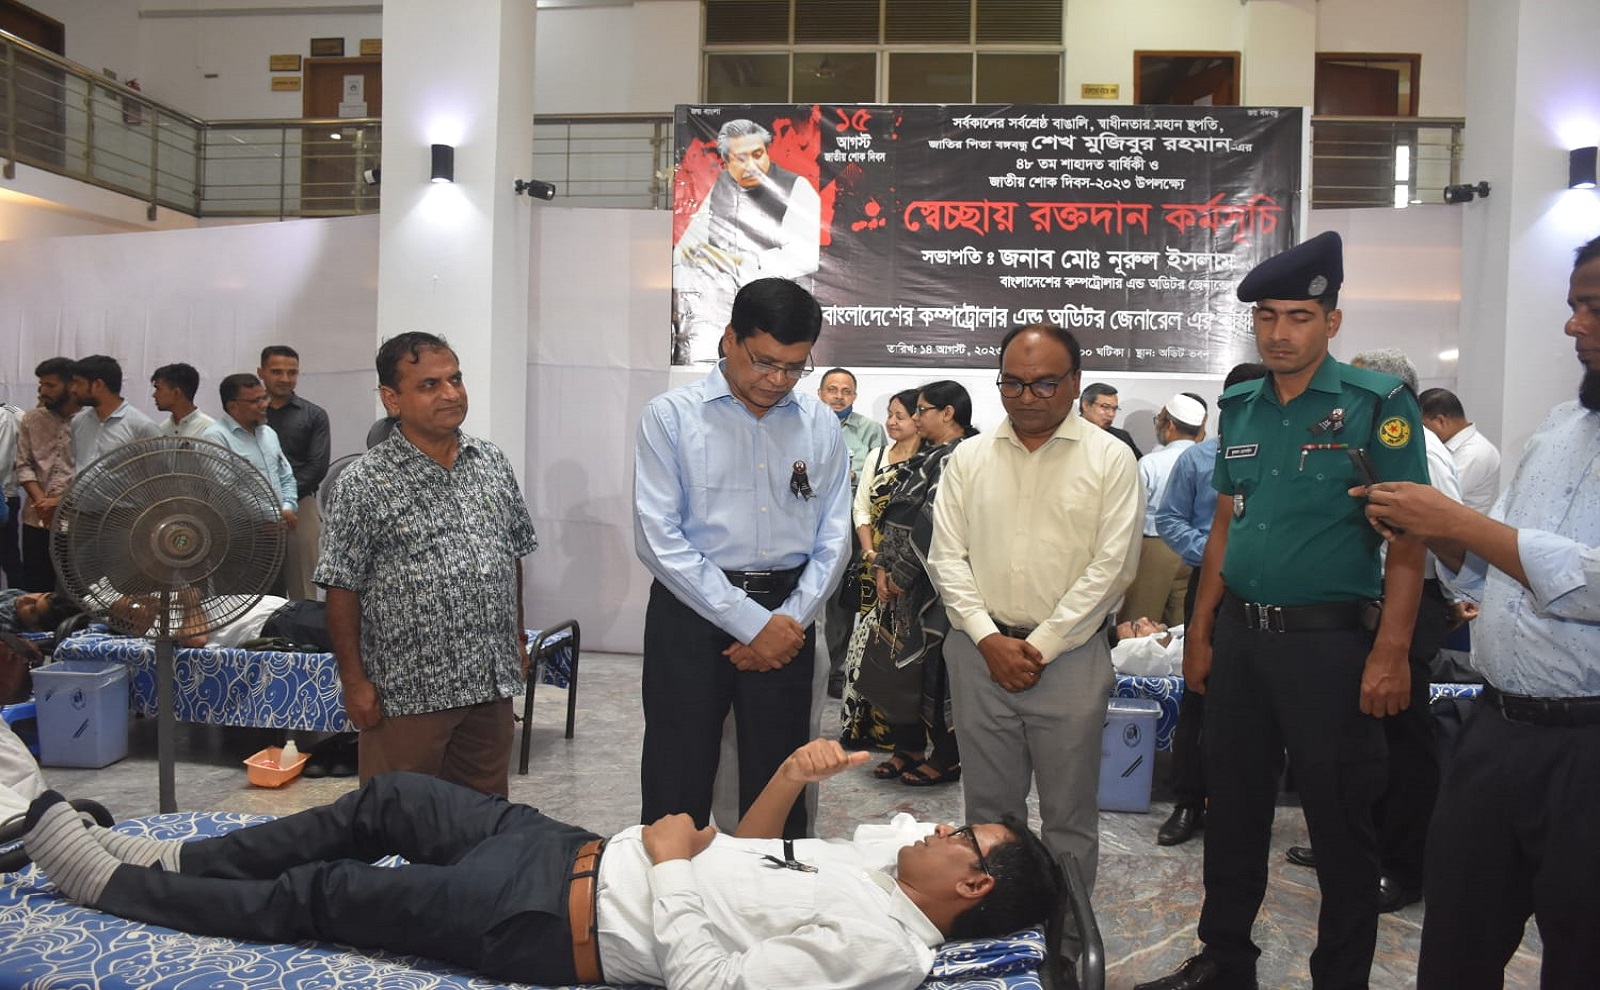 Voluntary blood donation program on the occasion of the 48th martyrdom anniversary and National Mourning Day-2023 of the greatest Bengali of all time, the great architect of freedom, Father of the Nation Bangabandhu Sheikh Mujibur Rahman.